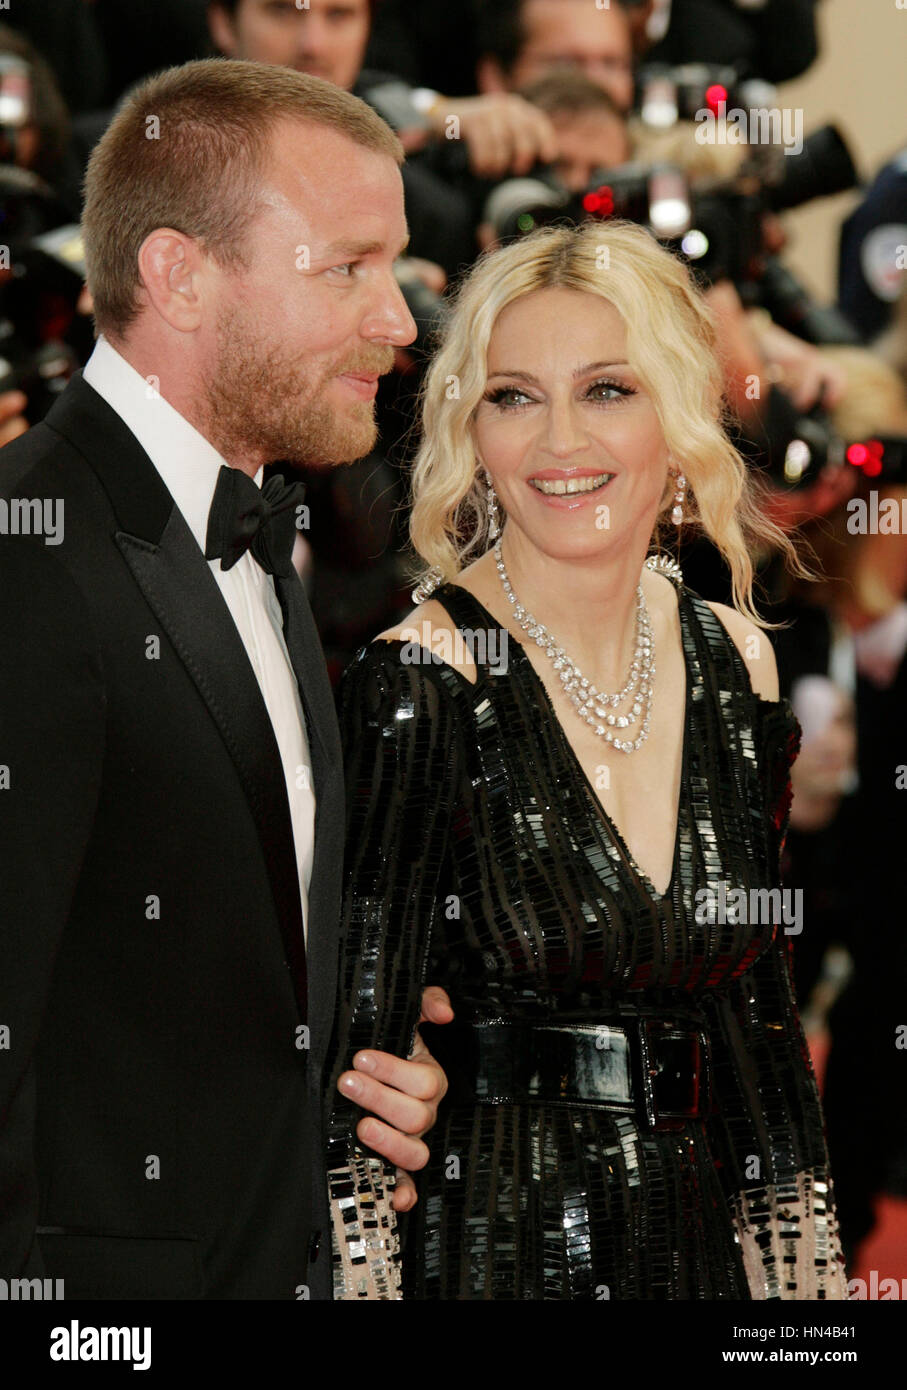 Madonna and her husband Guy Ritchie arrives at Palais des Festivals during the 61st International Cannes Film Festival on May 21, 2008 in Cannes, France. Photo by Francis Specker Stock Photo